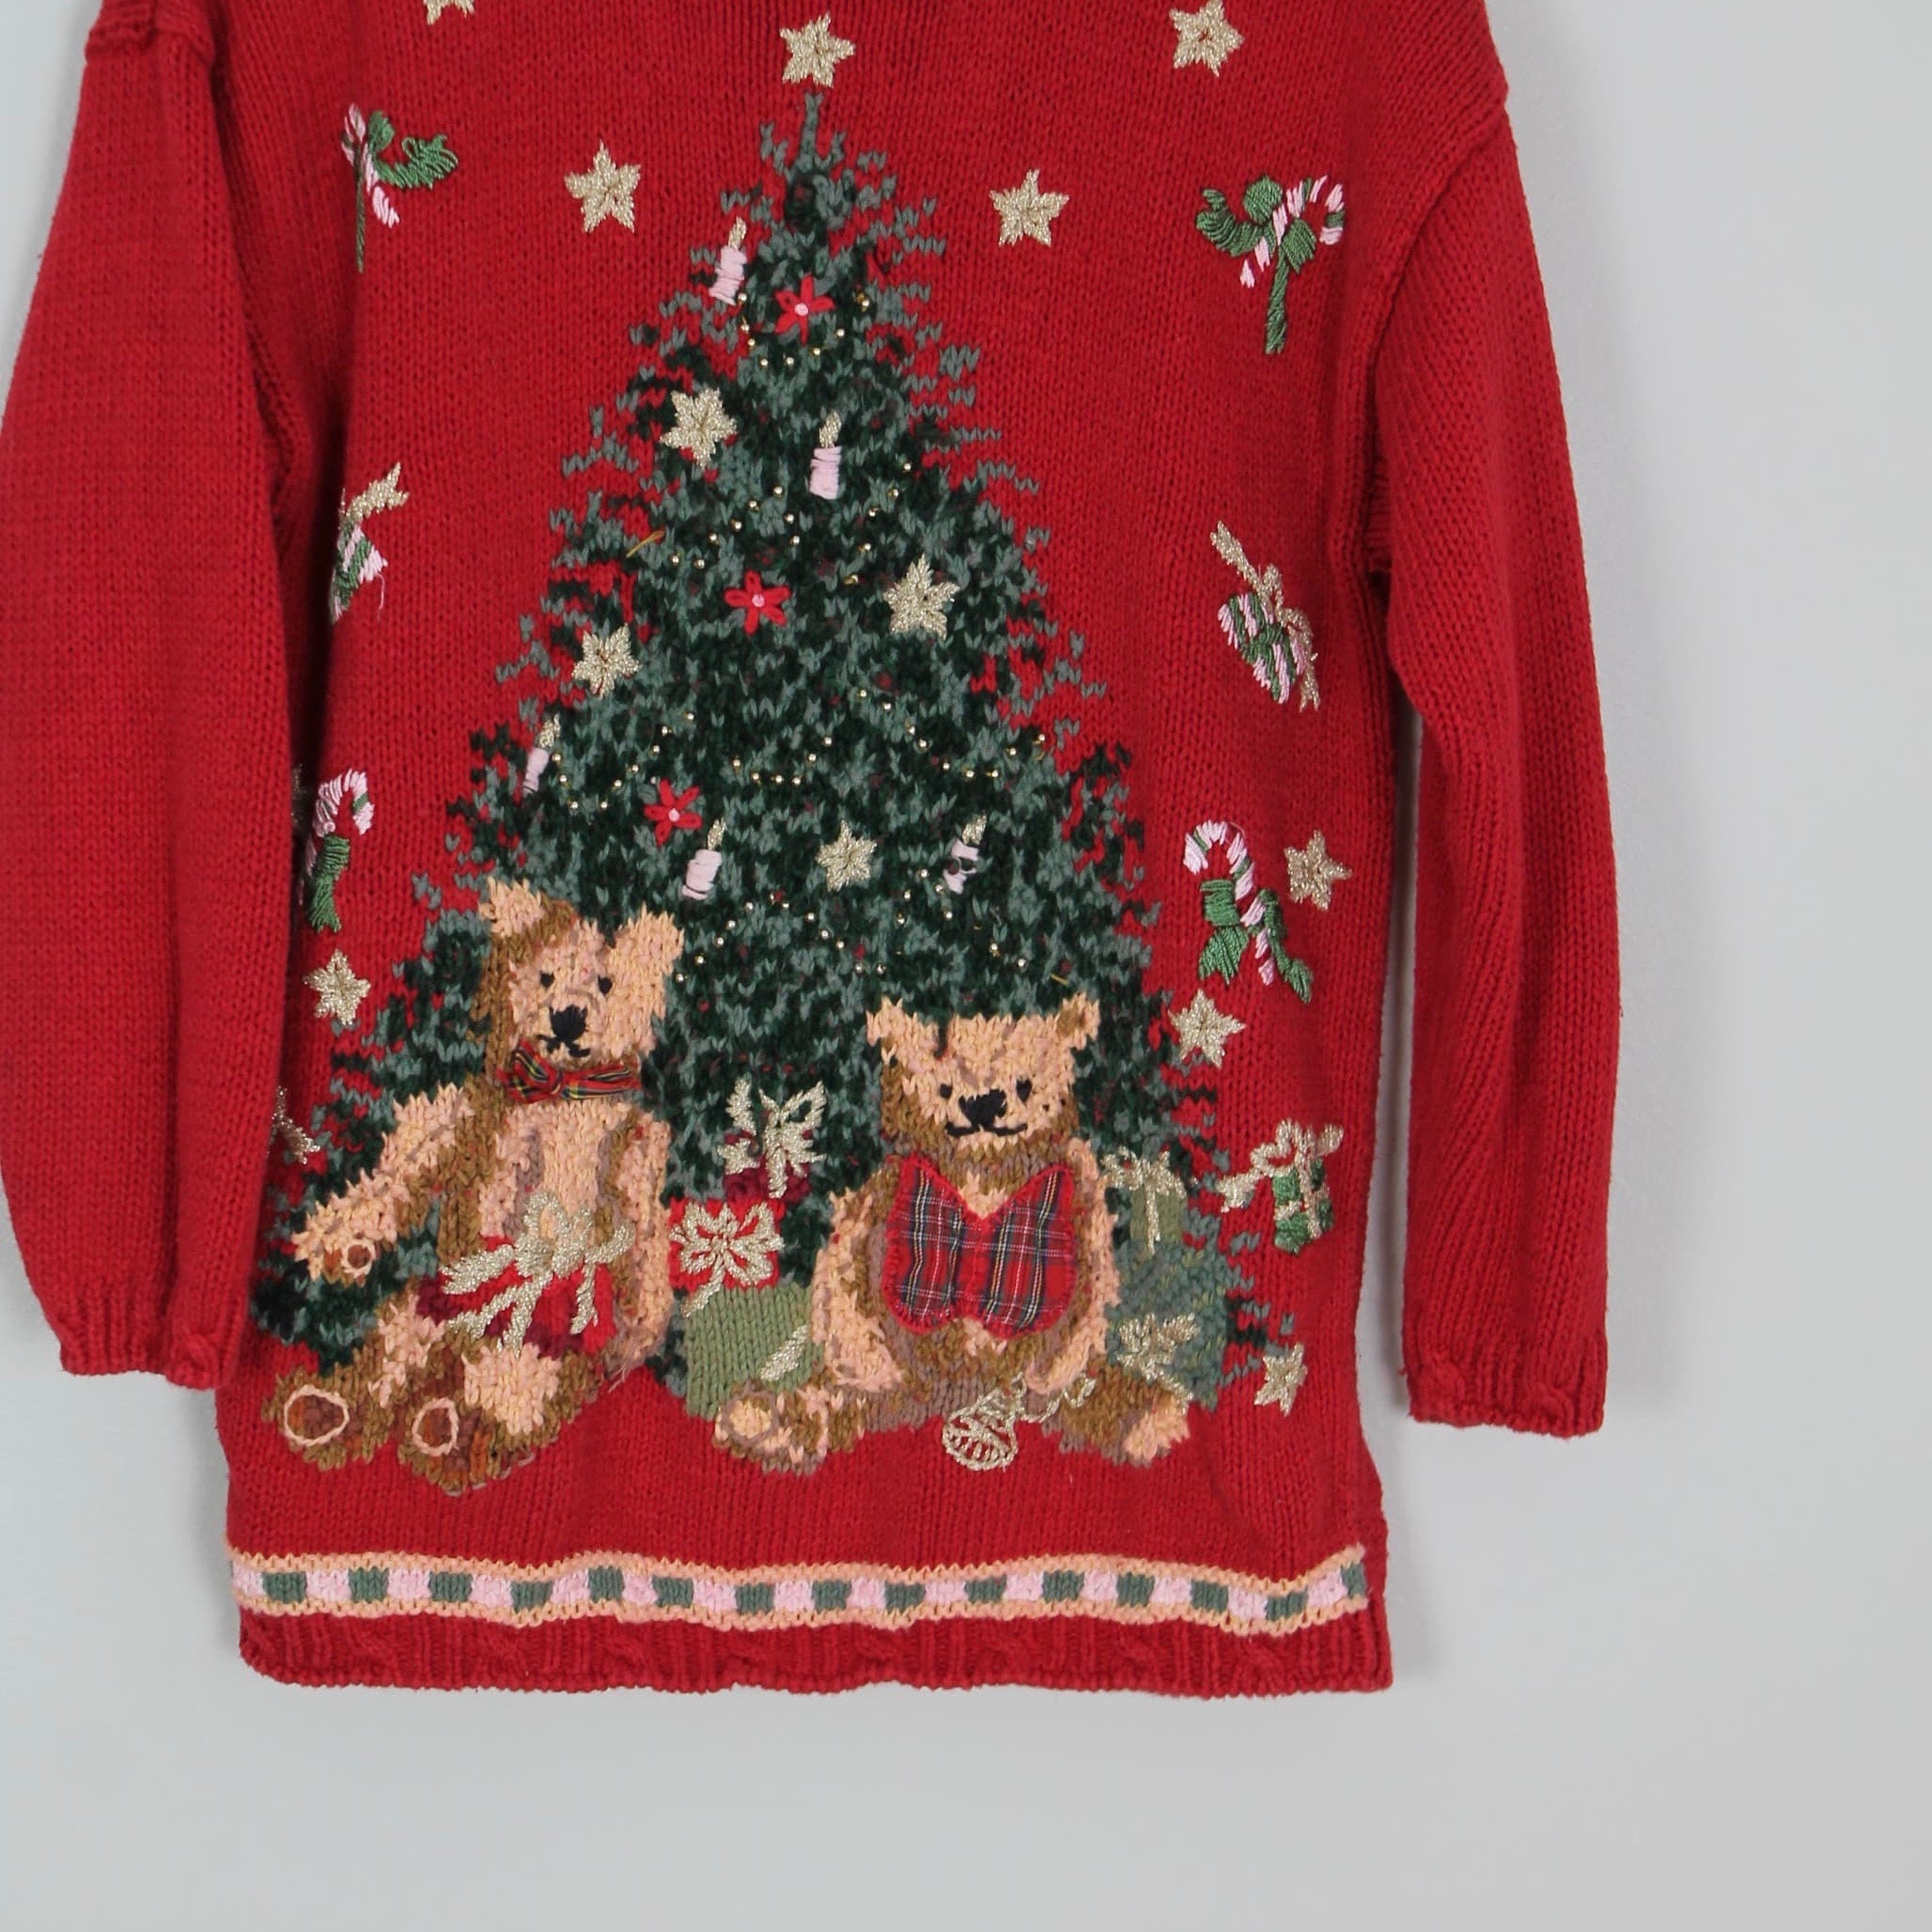 Vintage 90s Ugly Christmas Sweater Medium Red Pullover Womens Tree Presents